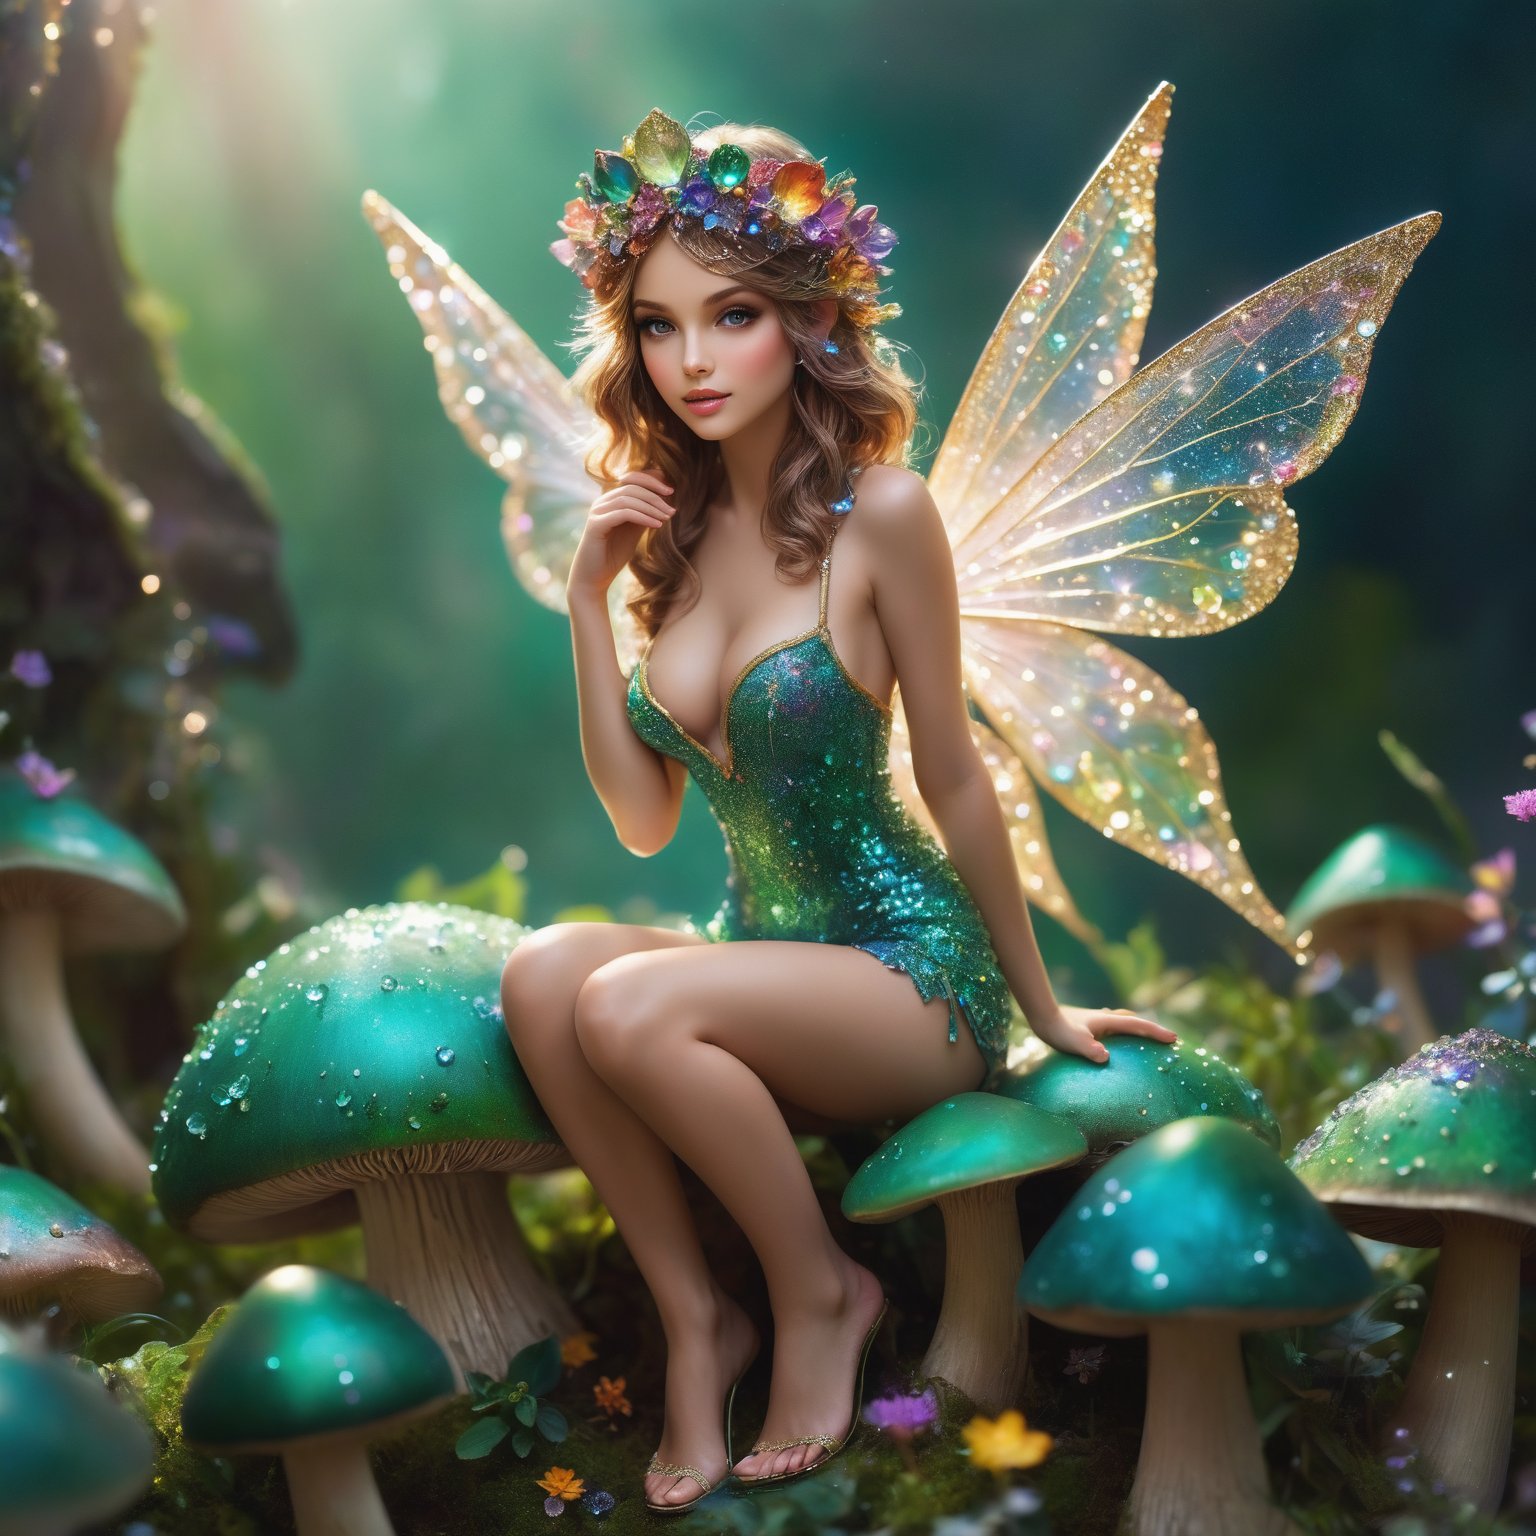 A delicate little sexy fairy perches atop a vibrant green mushroom, encrusted with crystals and glittering gemstones. Dew-kissed petals of magical flowers surround her, exuding an aura of love and happiness. Her large, detailed eyes sparkle with childlike wonder as she gazes into the camera. The soft morning light casts a warm glow, highlighting the intricate textures of her sparkling attire.